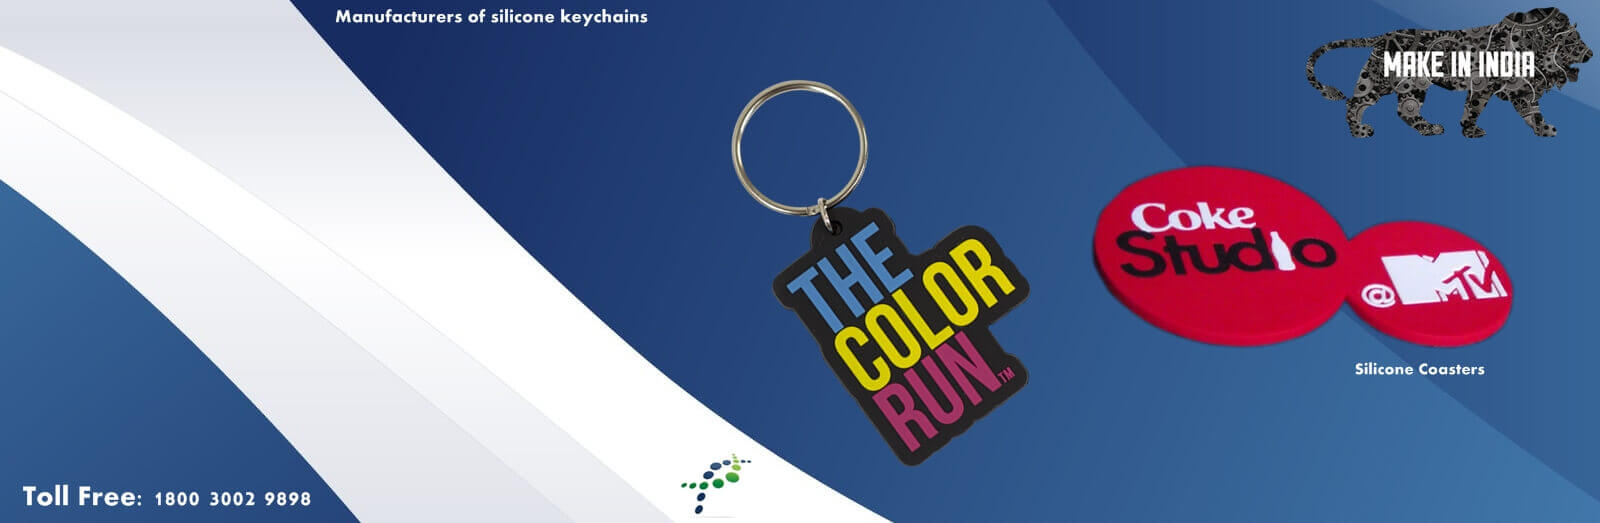 Rubber Keychain Manufacturer in Hyderabad,Keychain in Hyderabad,Keychain Manufacturer in Banglore,Promotional Keychain in Hyderabad,Customized Keychain in Banglore,Keychain Wholesaler in Hyderabad 